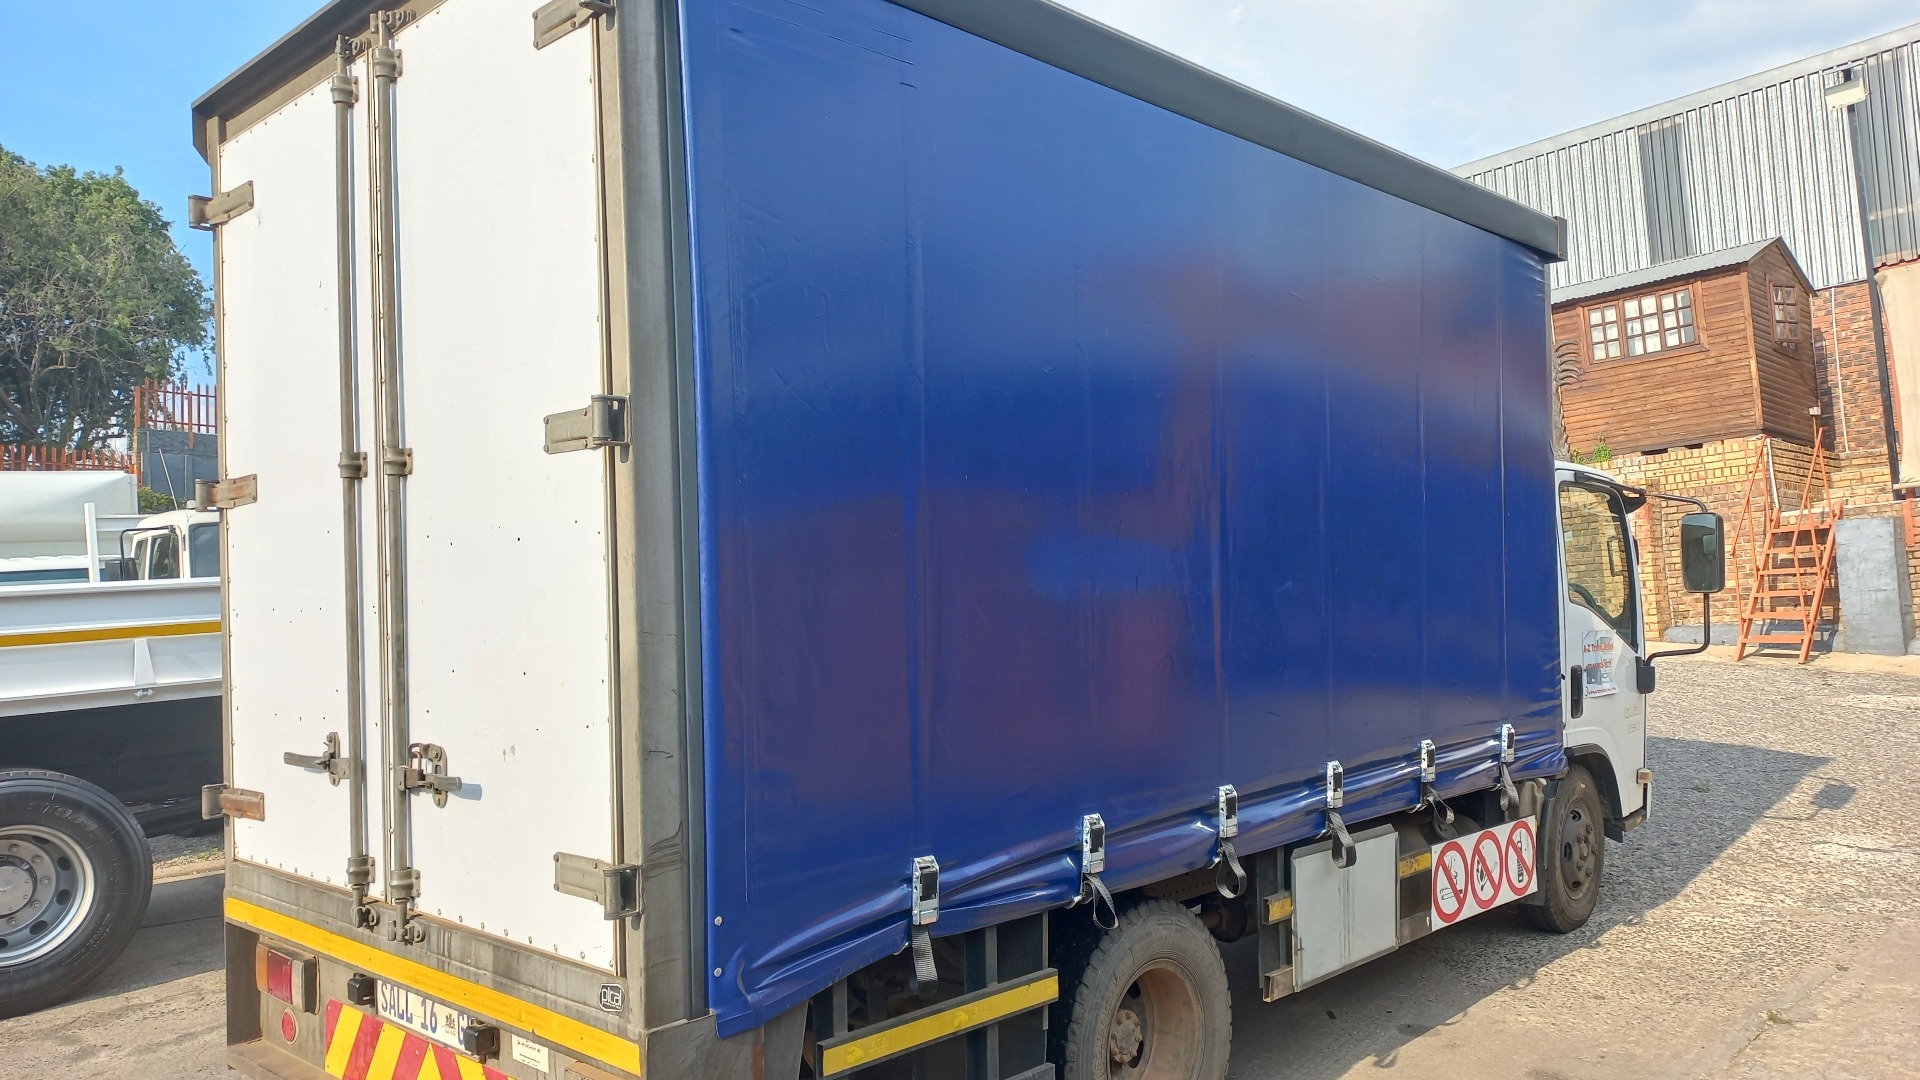 Isuzu Curtain side trucks NMR250 AMT 2.5TON 2015 for sale by A to Z TRUCK SALES | Truck & Trailer Marketplace